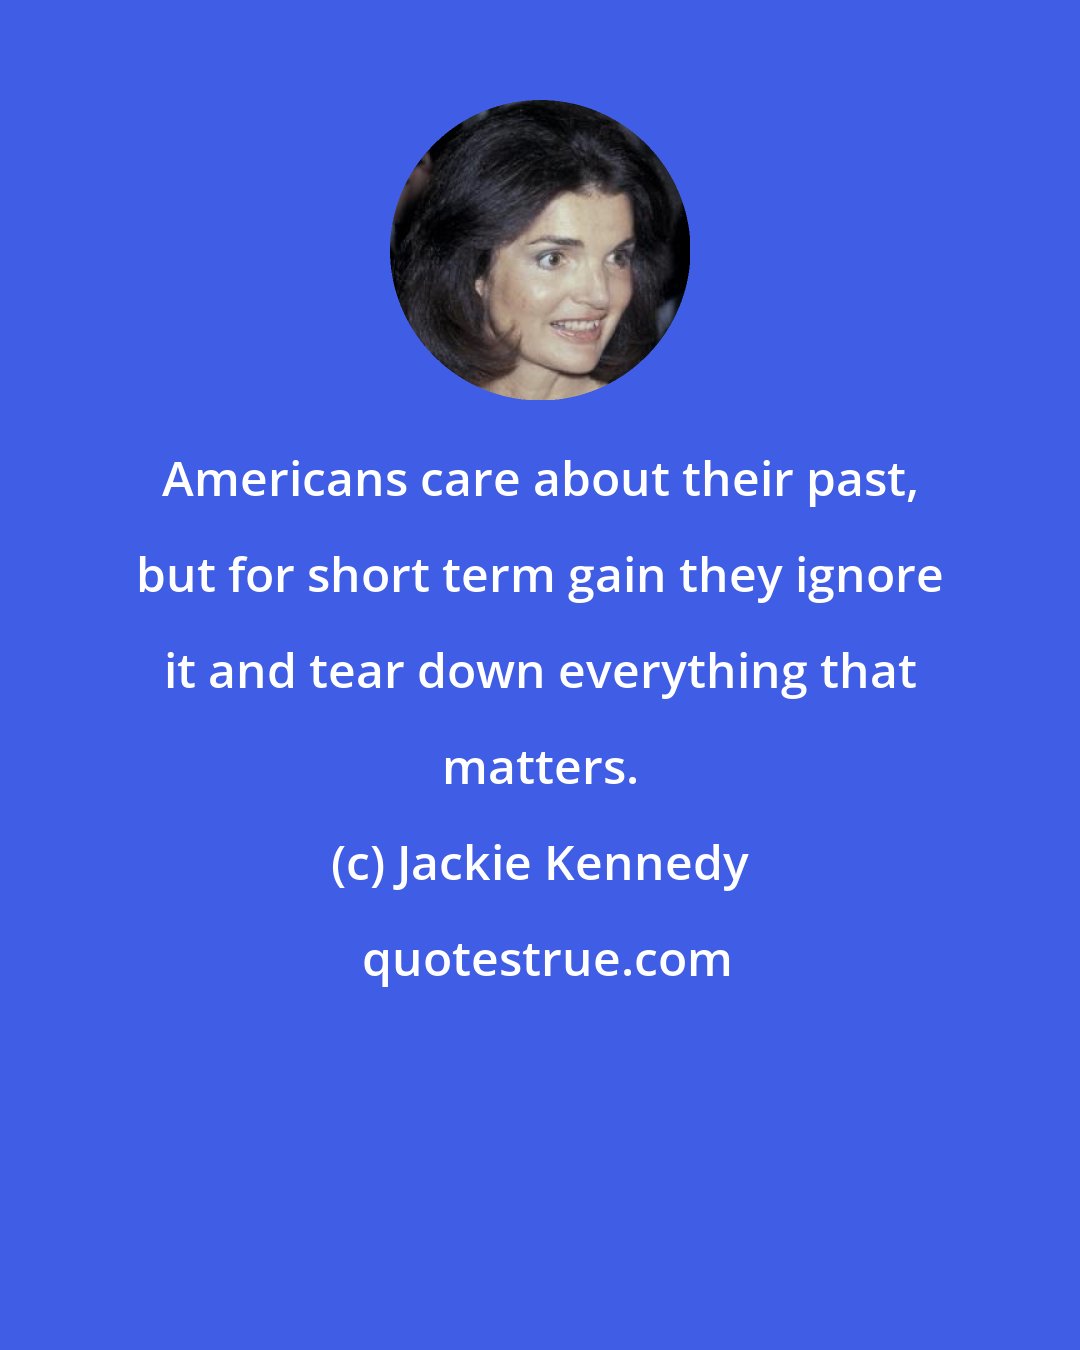 Jackie Kennedy: Americans care about their past, but for short term gain they ignore it and tear down everything that matters.